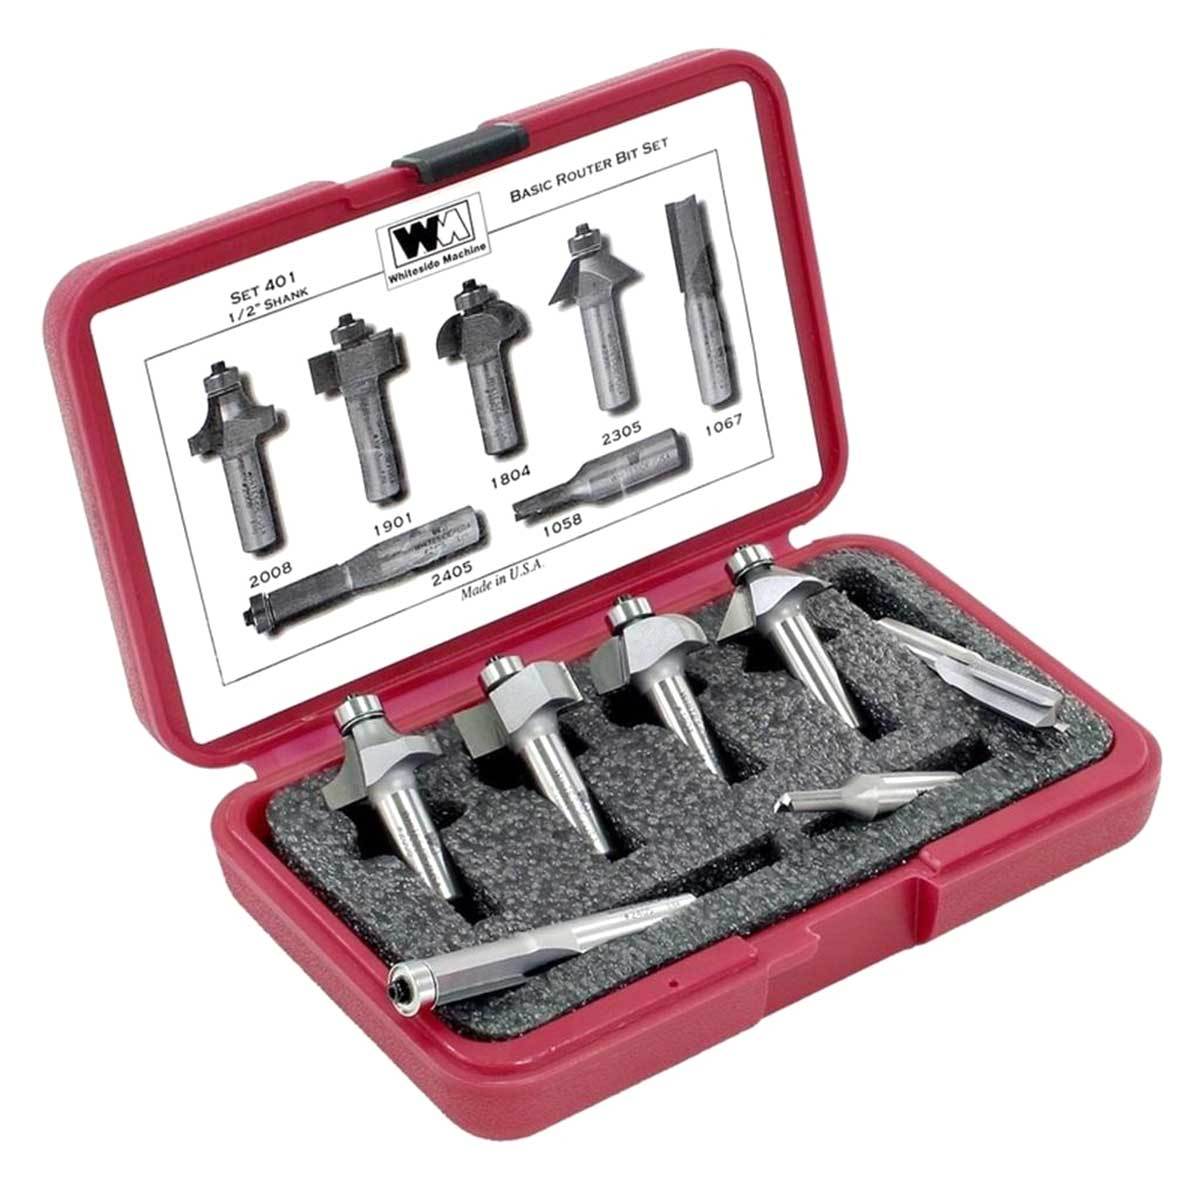 Ultimate Tools Whiteside Complete Basic Router Bit Set 7 Piece  - 1/4" & 1/2" Shank